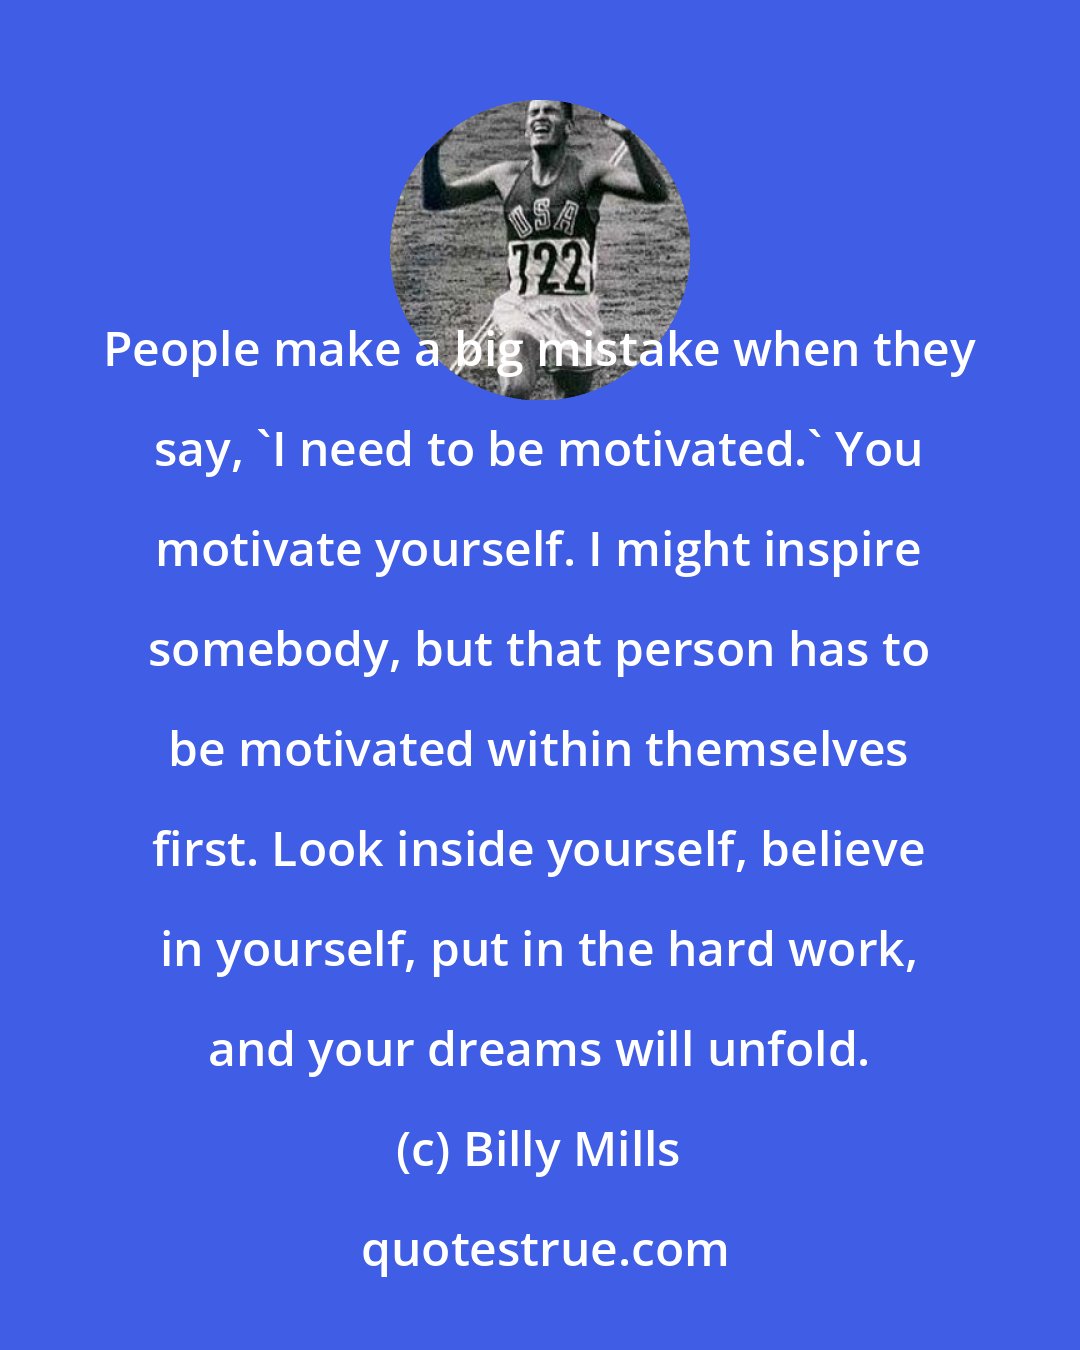 Billy Mills: People make a big mistake when they say, 'I need to be motivated.' You motivate yourself. I might inspire somebody, but that person has to be motivated within themselves first. Look inside yourself, believe in yourself, put in the hard work, and your dreams will unfold.